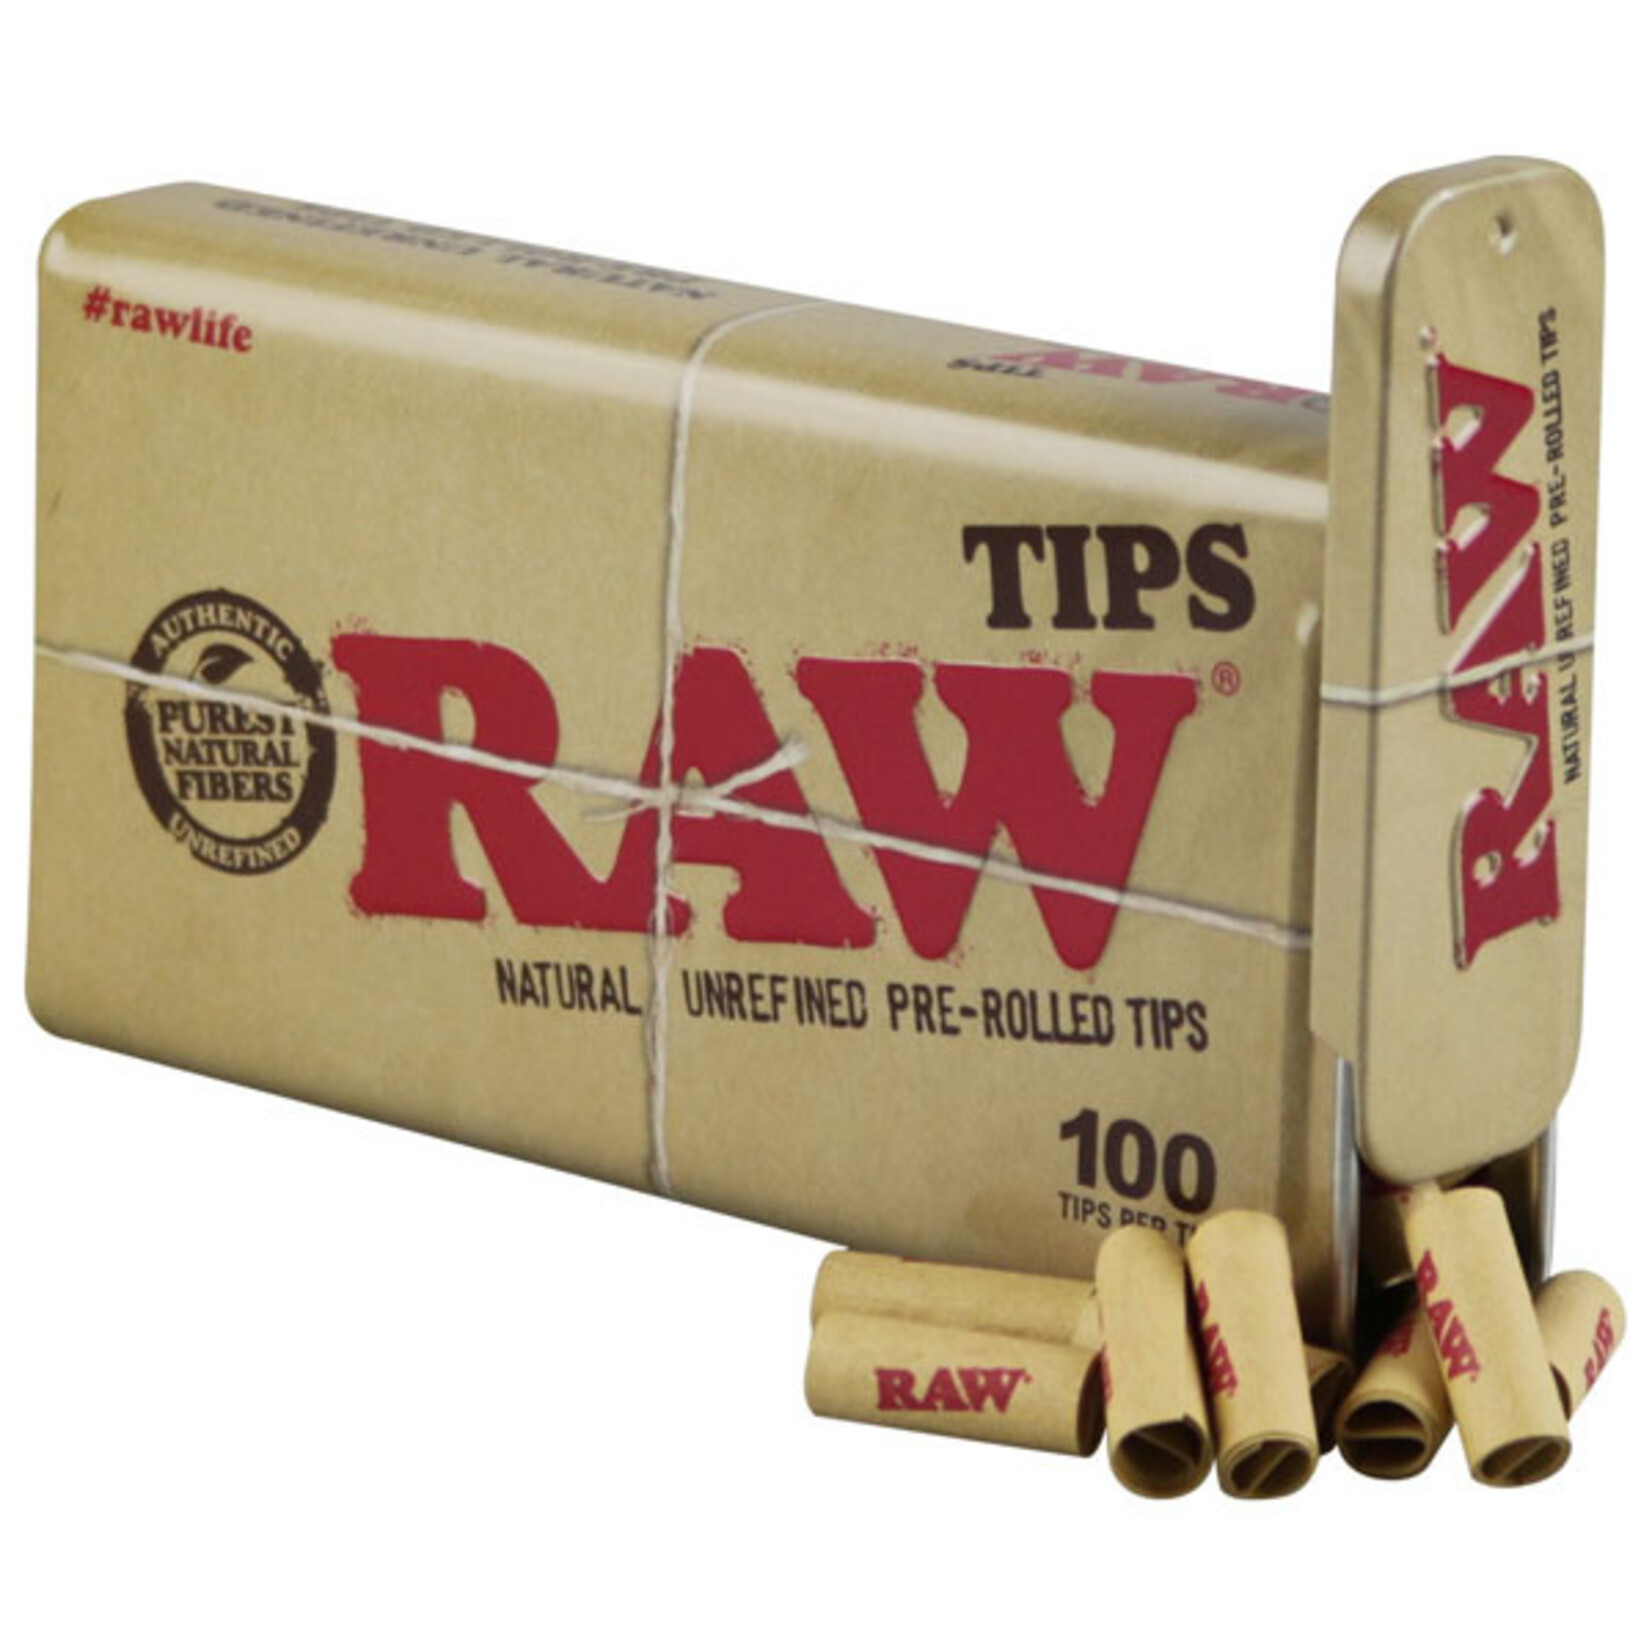 RAW RAW Pre-Rolled cone Tips Tin (100)ct